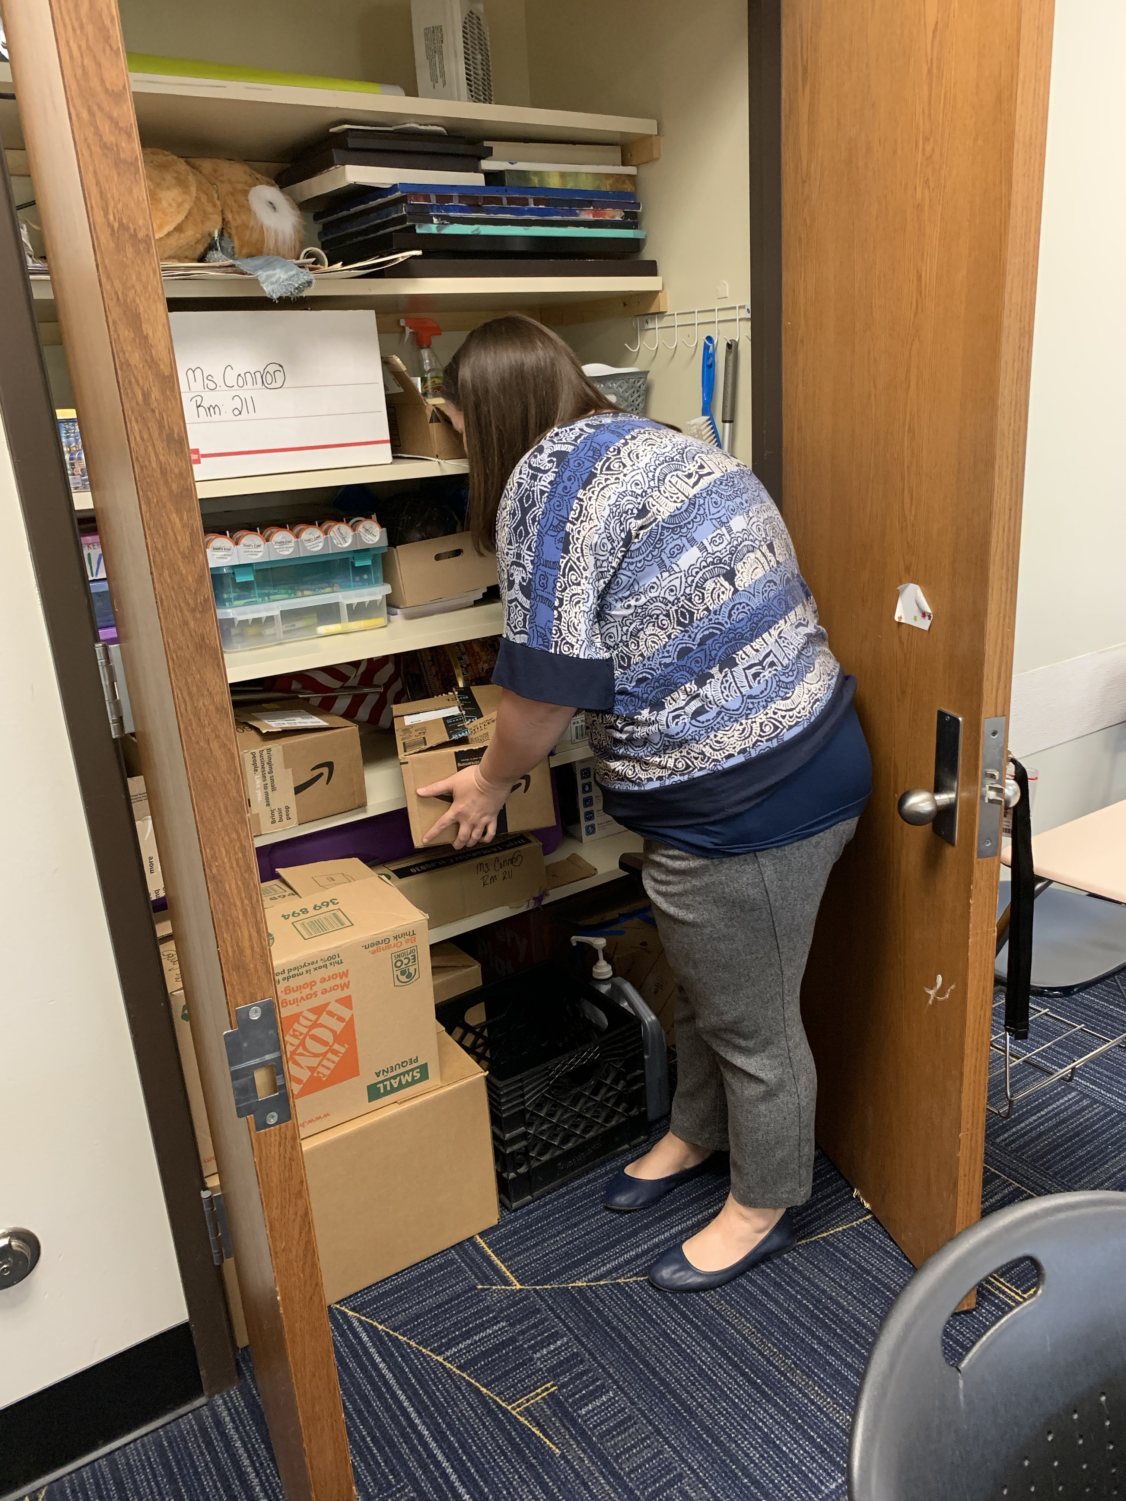 Sheila Connor, an English teacher, packs up her classroom, into her closet in preparation for the next school year. As a tenured teacher, she has acquired a number of classroom supplies that require a great deal of storage space.  